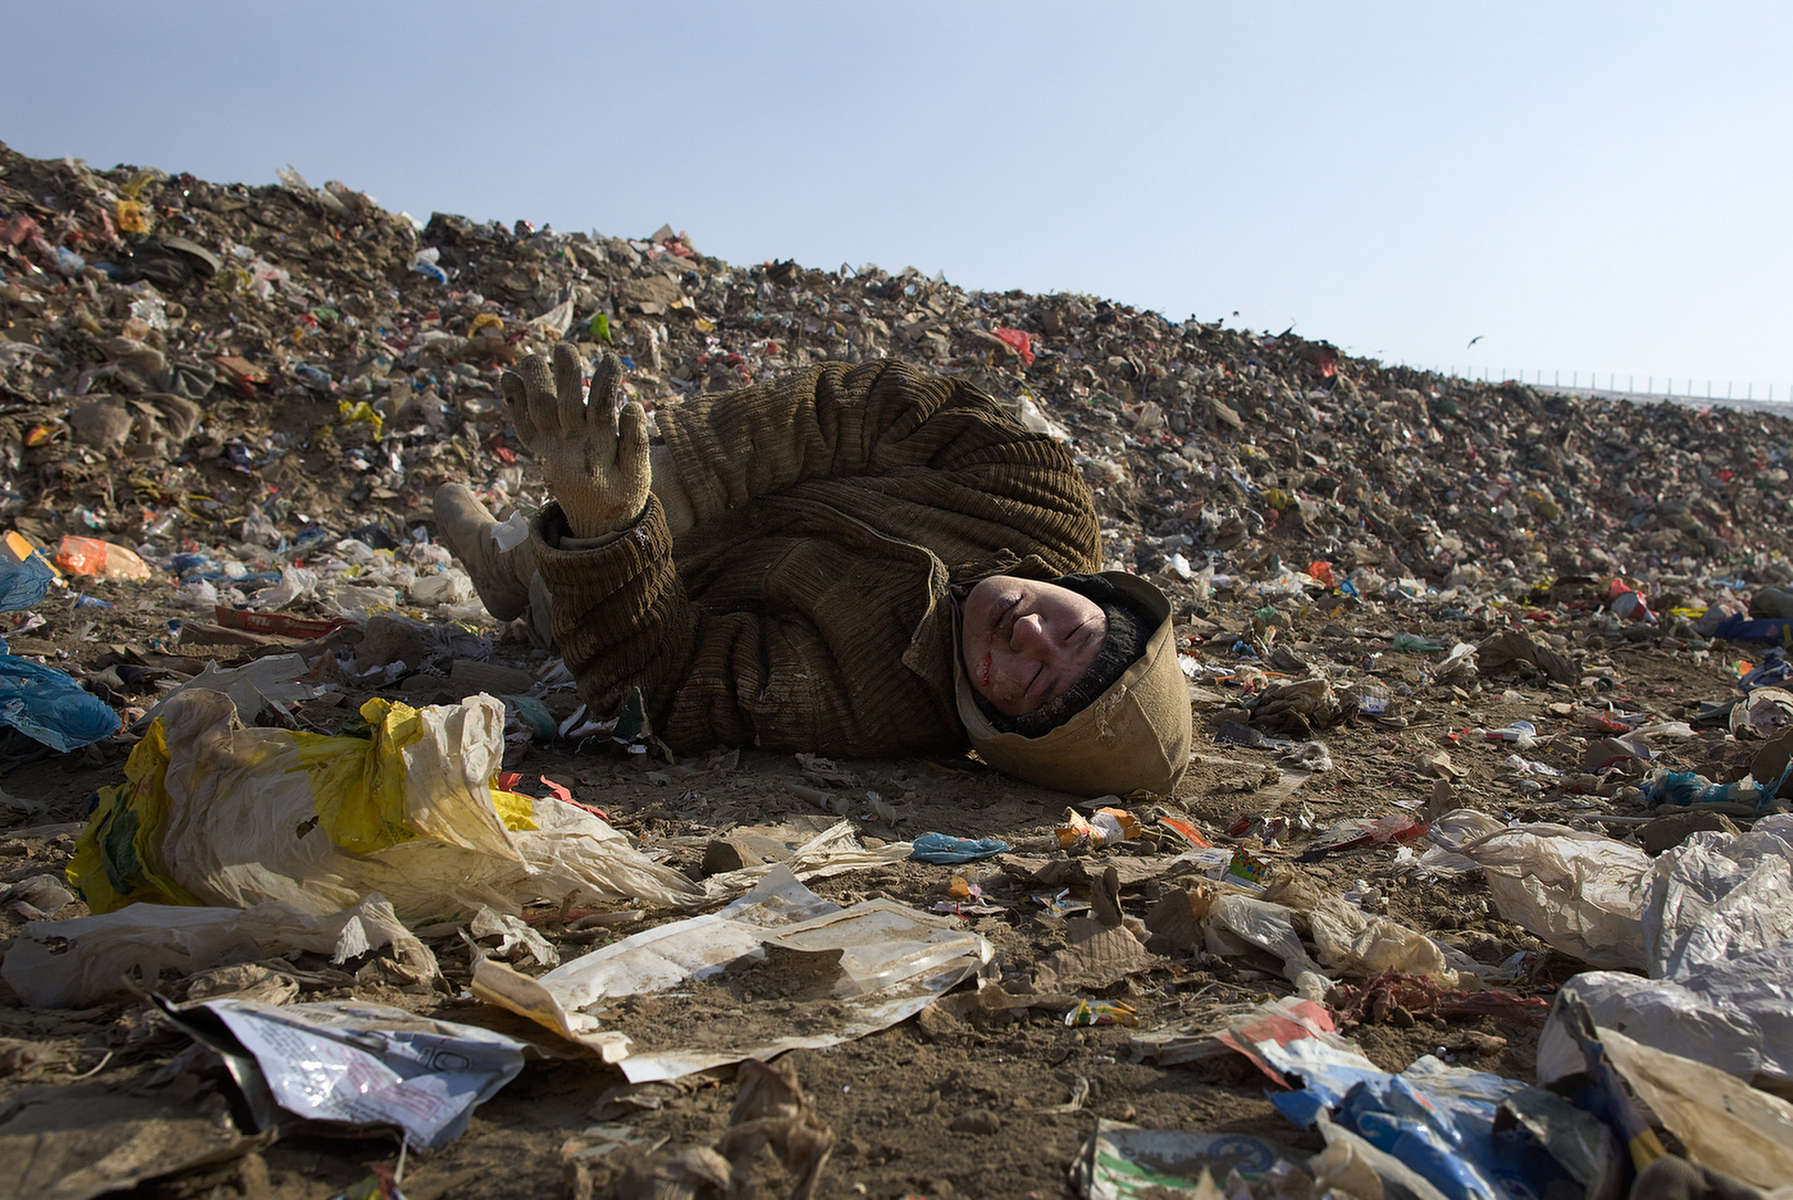 ULAAN BAATAR, MONGOLIA-MARCH 5 :  Turu, a Mongolian worker collapses after having a serious seizure while working collecting and recycling the garbage at a dump March 5, 2010  in Ulaan Baatar, Mongolia. Working at the garbage dump means extreme hardship, long hours outside in frigid temperatures dropping below -25C in the Winter as Mongolia experienced one of the worst Winter in 30 years. Presently the government has declared an emergency requiring foreign aid to alleviate the impact of the {quote} Zud{quote} ( Mongolian term for a multiple natural disaster) caused by bitter cold and thick snow. Currently 1.5 million goats,  921,000 sheep, 169,000 cows and yaks, 89,000 horses and 1,500 camels had died according to the various UN agency reports. Many Mongolians have immigrated to the capitol city from the far away provinces seeking employment, living in rented traditional circular felt yurts with no running water or electricity.(Photo by Paula Bronstein /Getty Images)